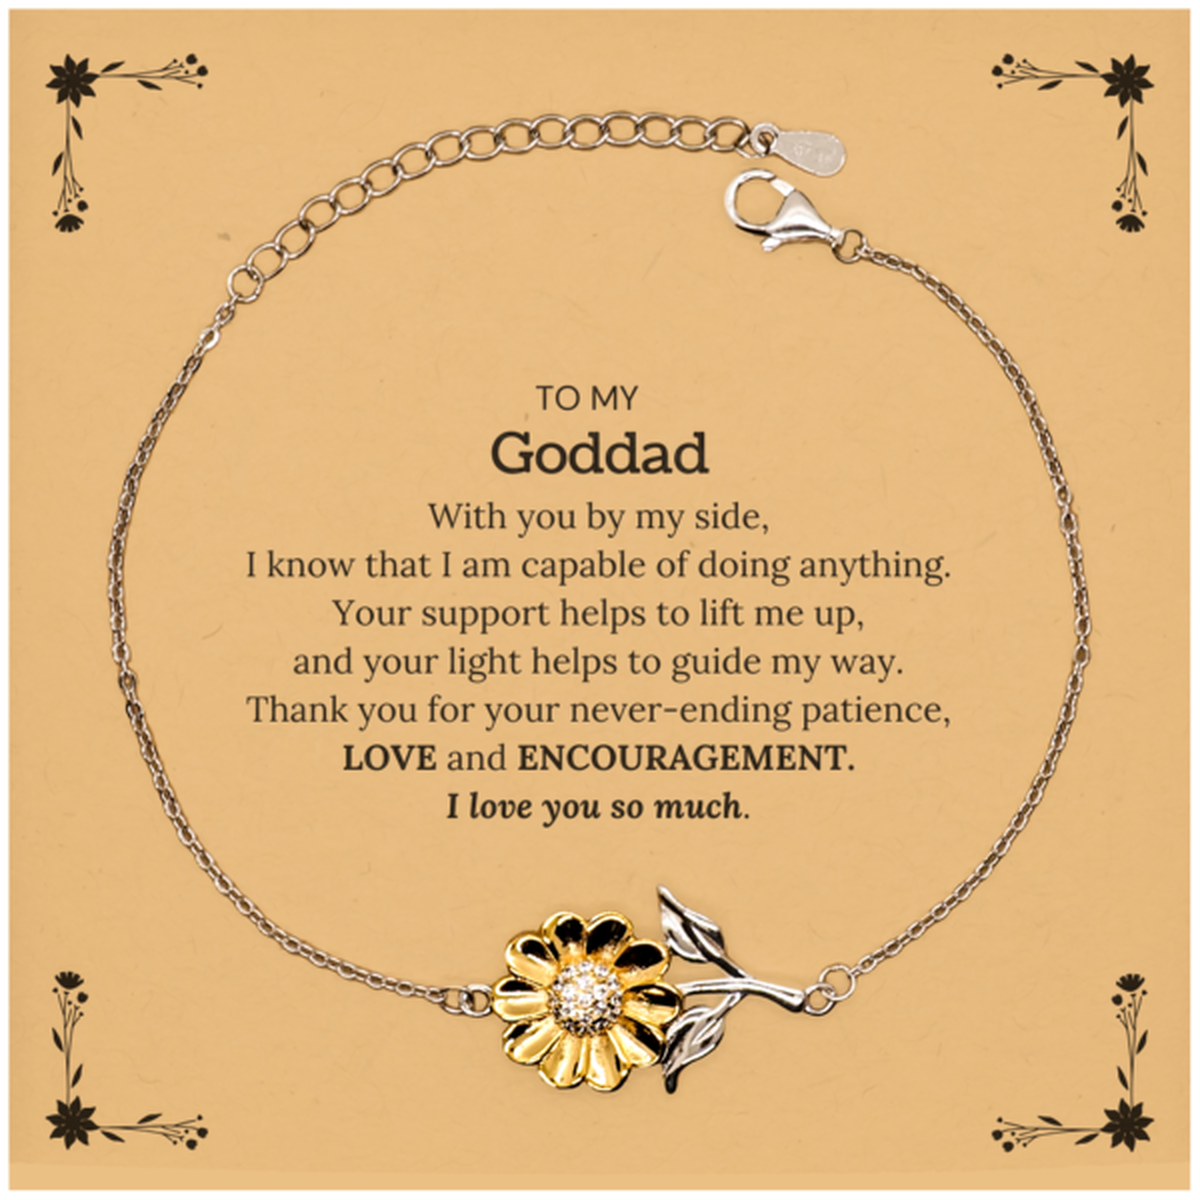 Appreciation Goddad Sunflower Bracelet Gifts, To My Goddad Birthday Christmas Wedding Keepsake Gifts for Goddad With you by my side, I know that I am capable of doing anything. I love you so much